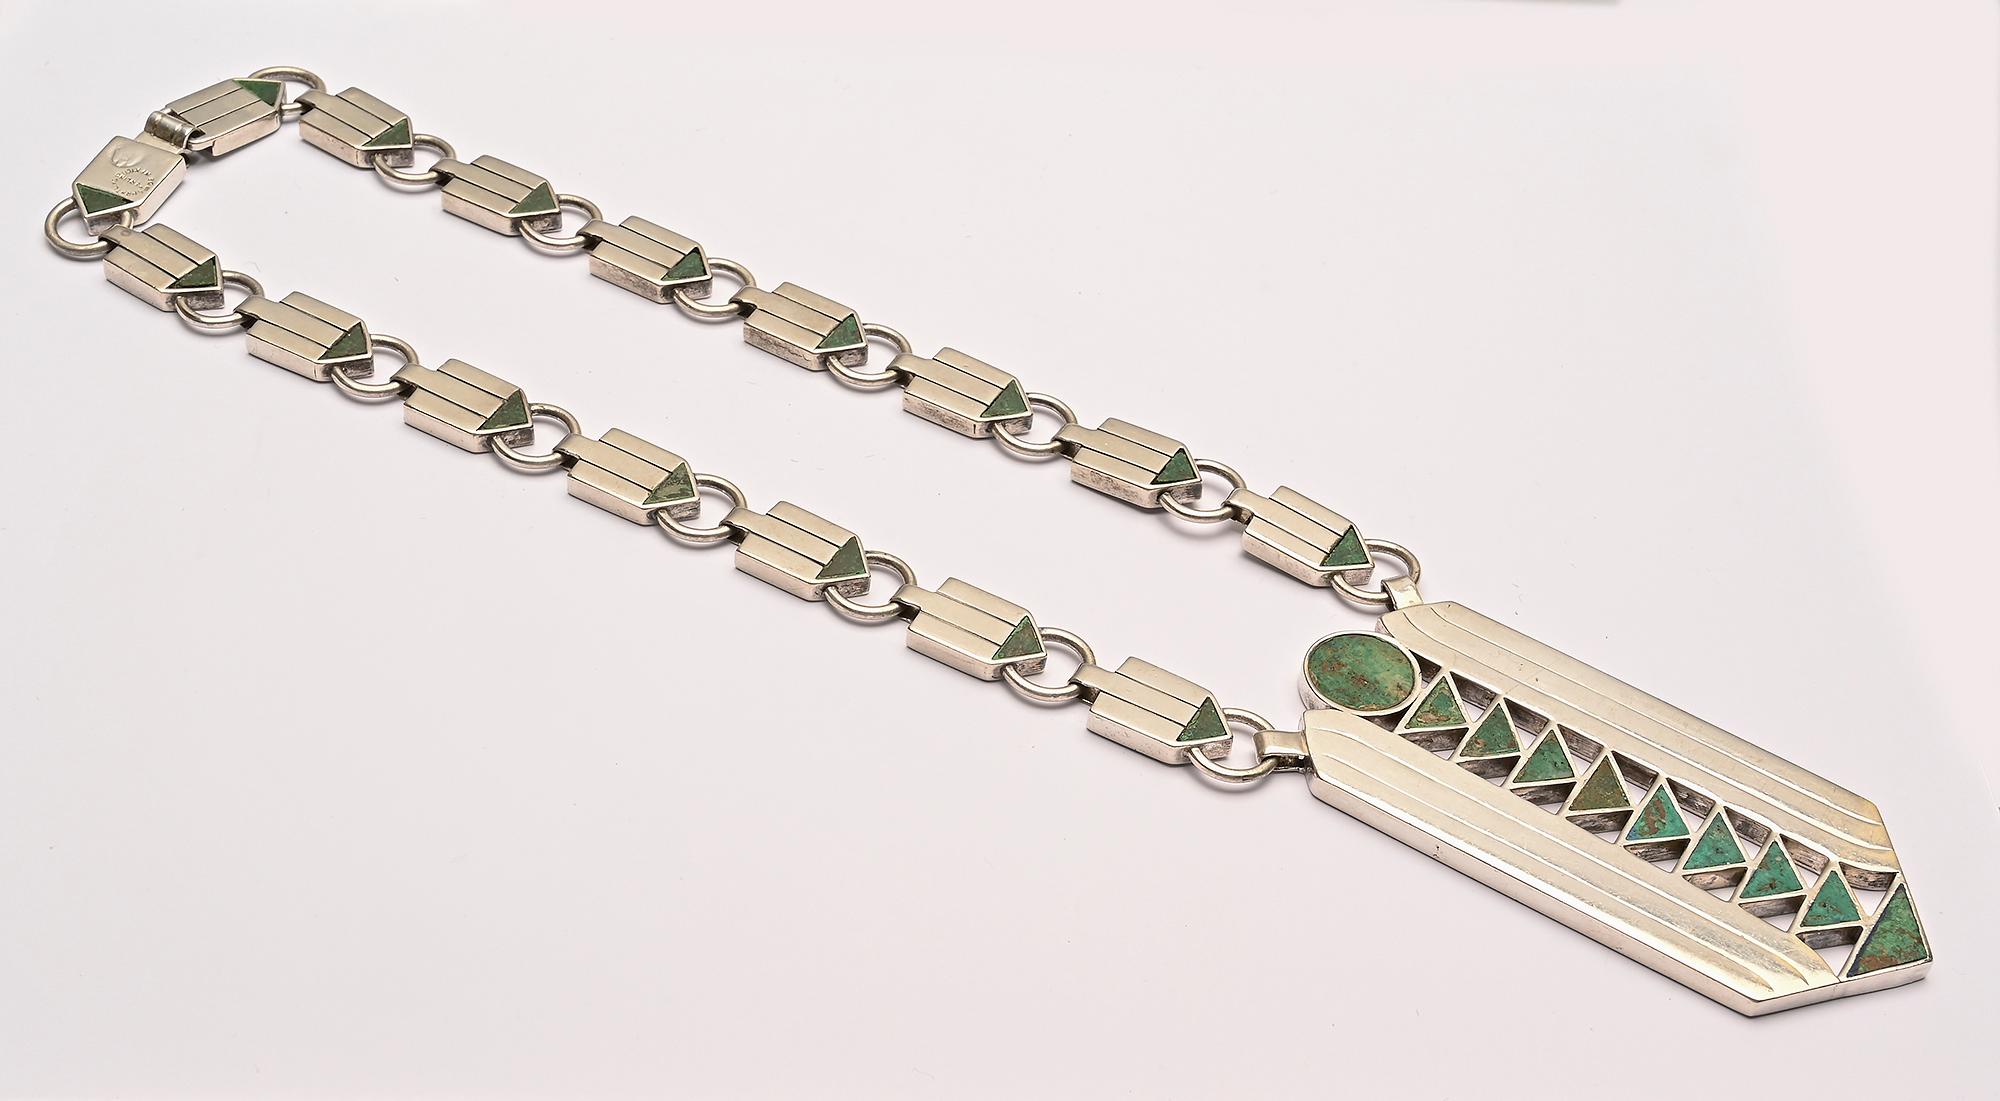 Sterling silver with azure malachite arrows necklace by the father of the Mexican jewelry design movement, William Spratling. Circles, rectangles and triangles are combined to make a dense yet open overall design. The necklace chain measures 17